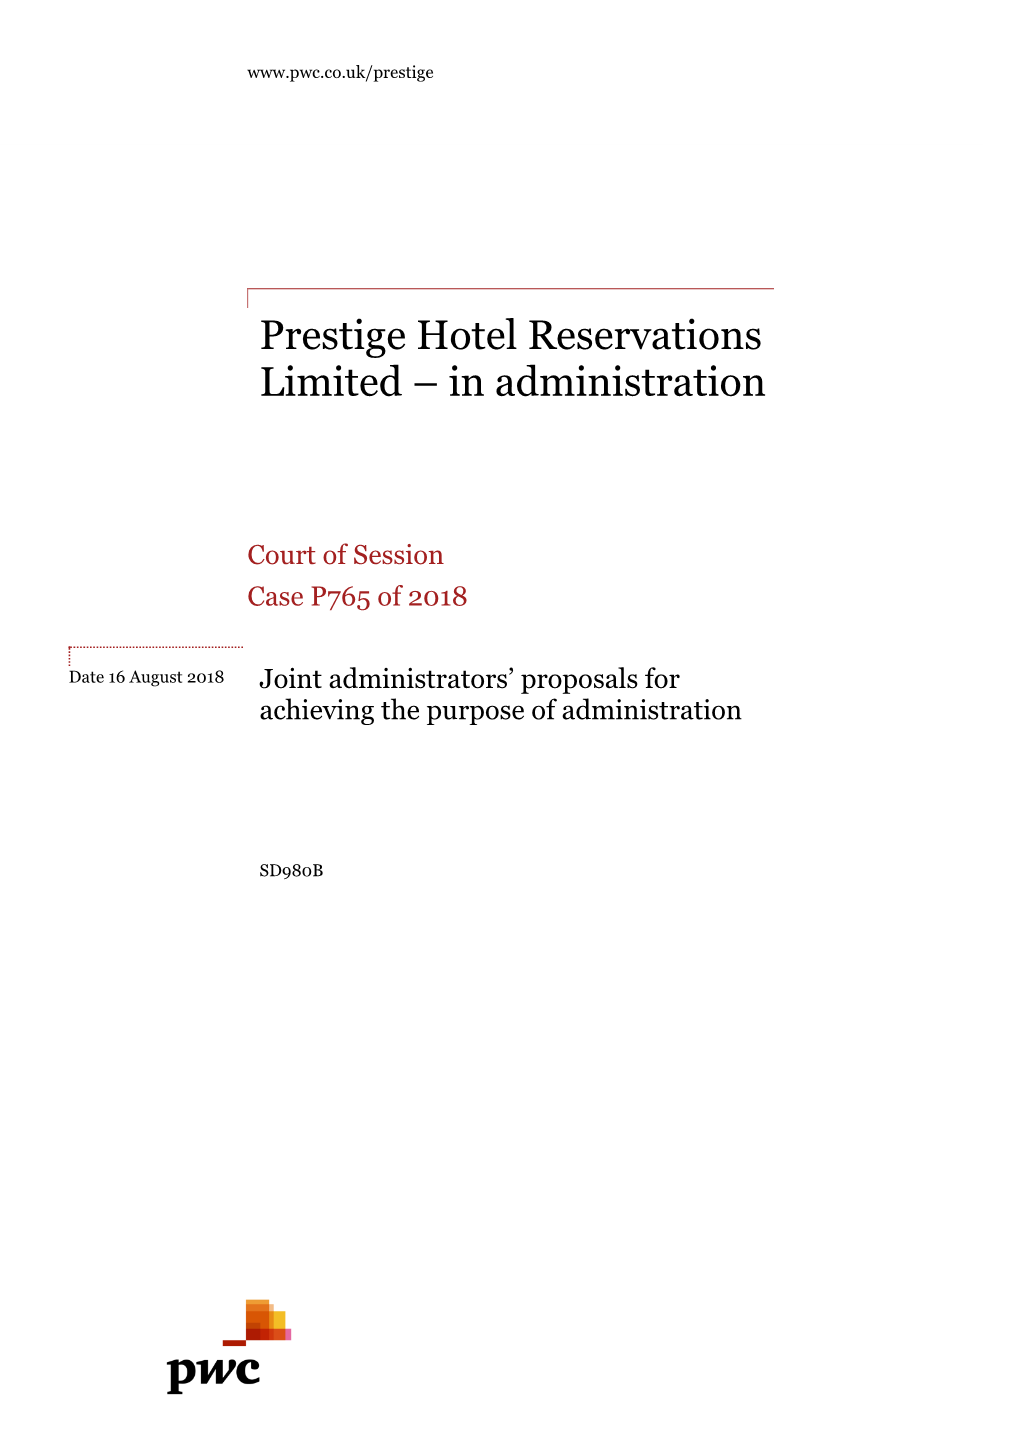 Prestige Hotel Reservations Limited – in Administration